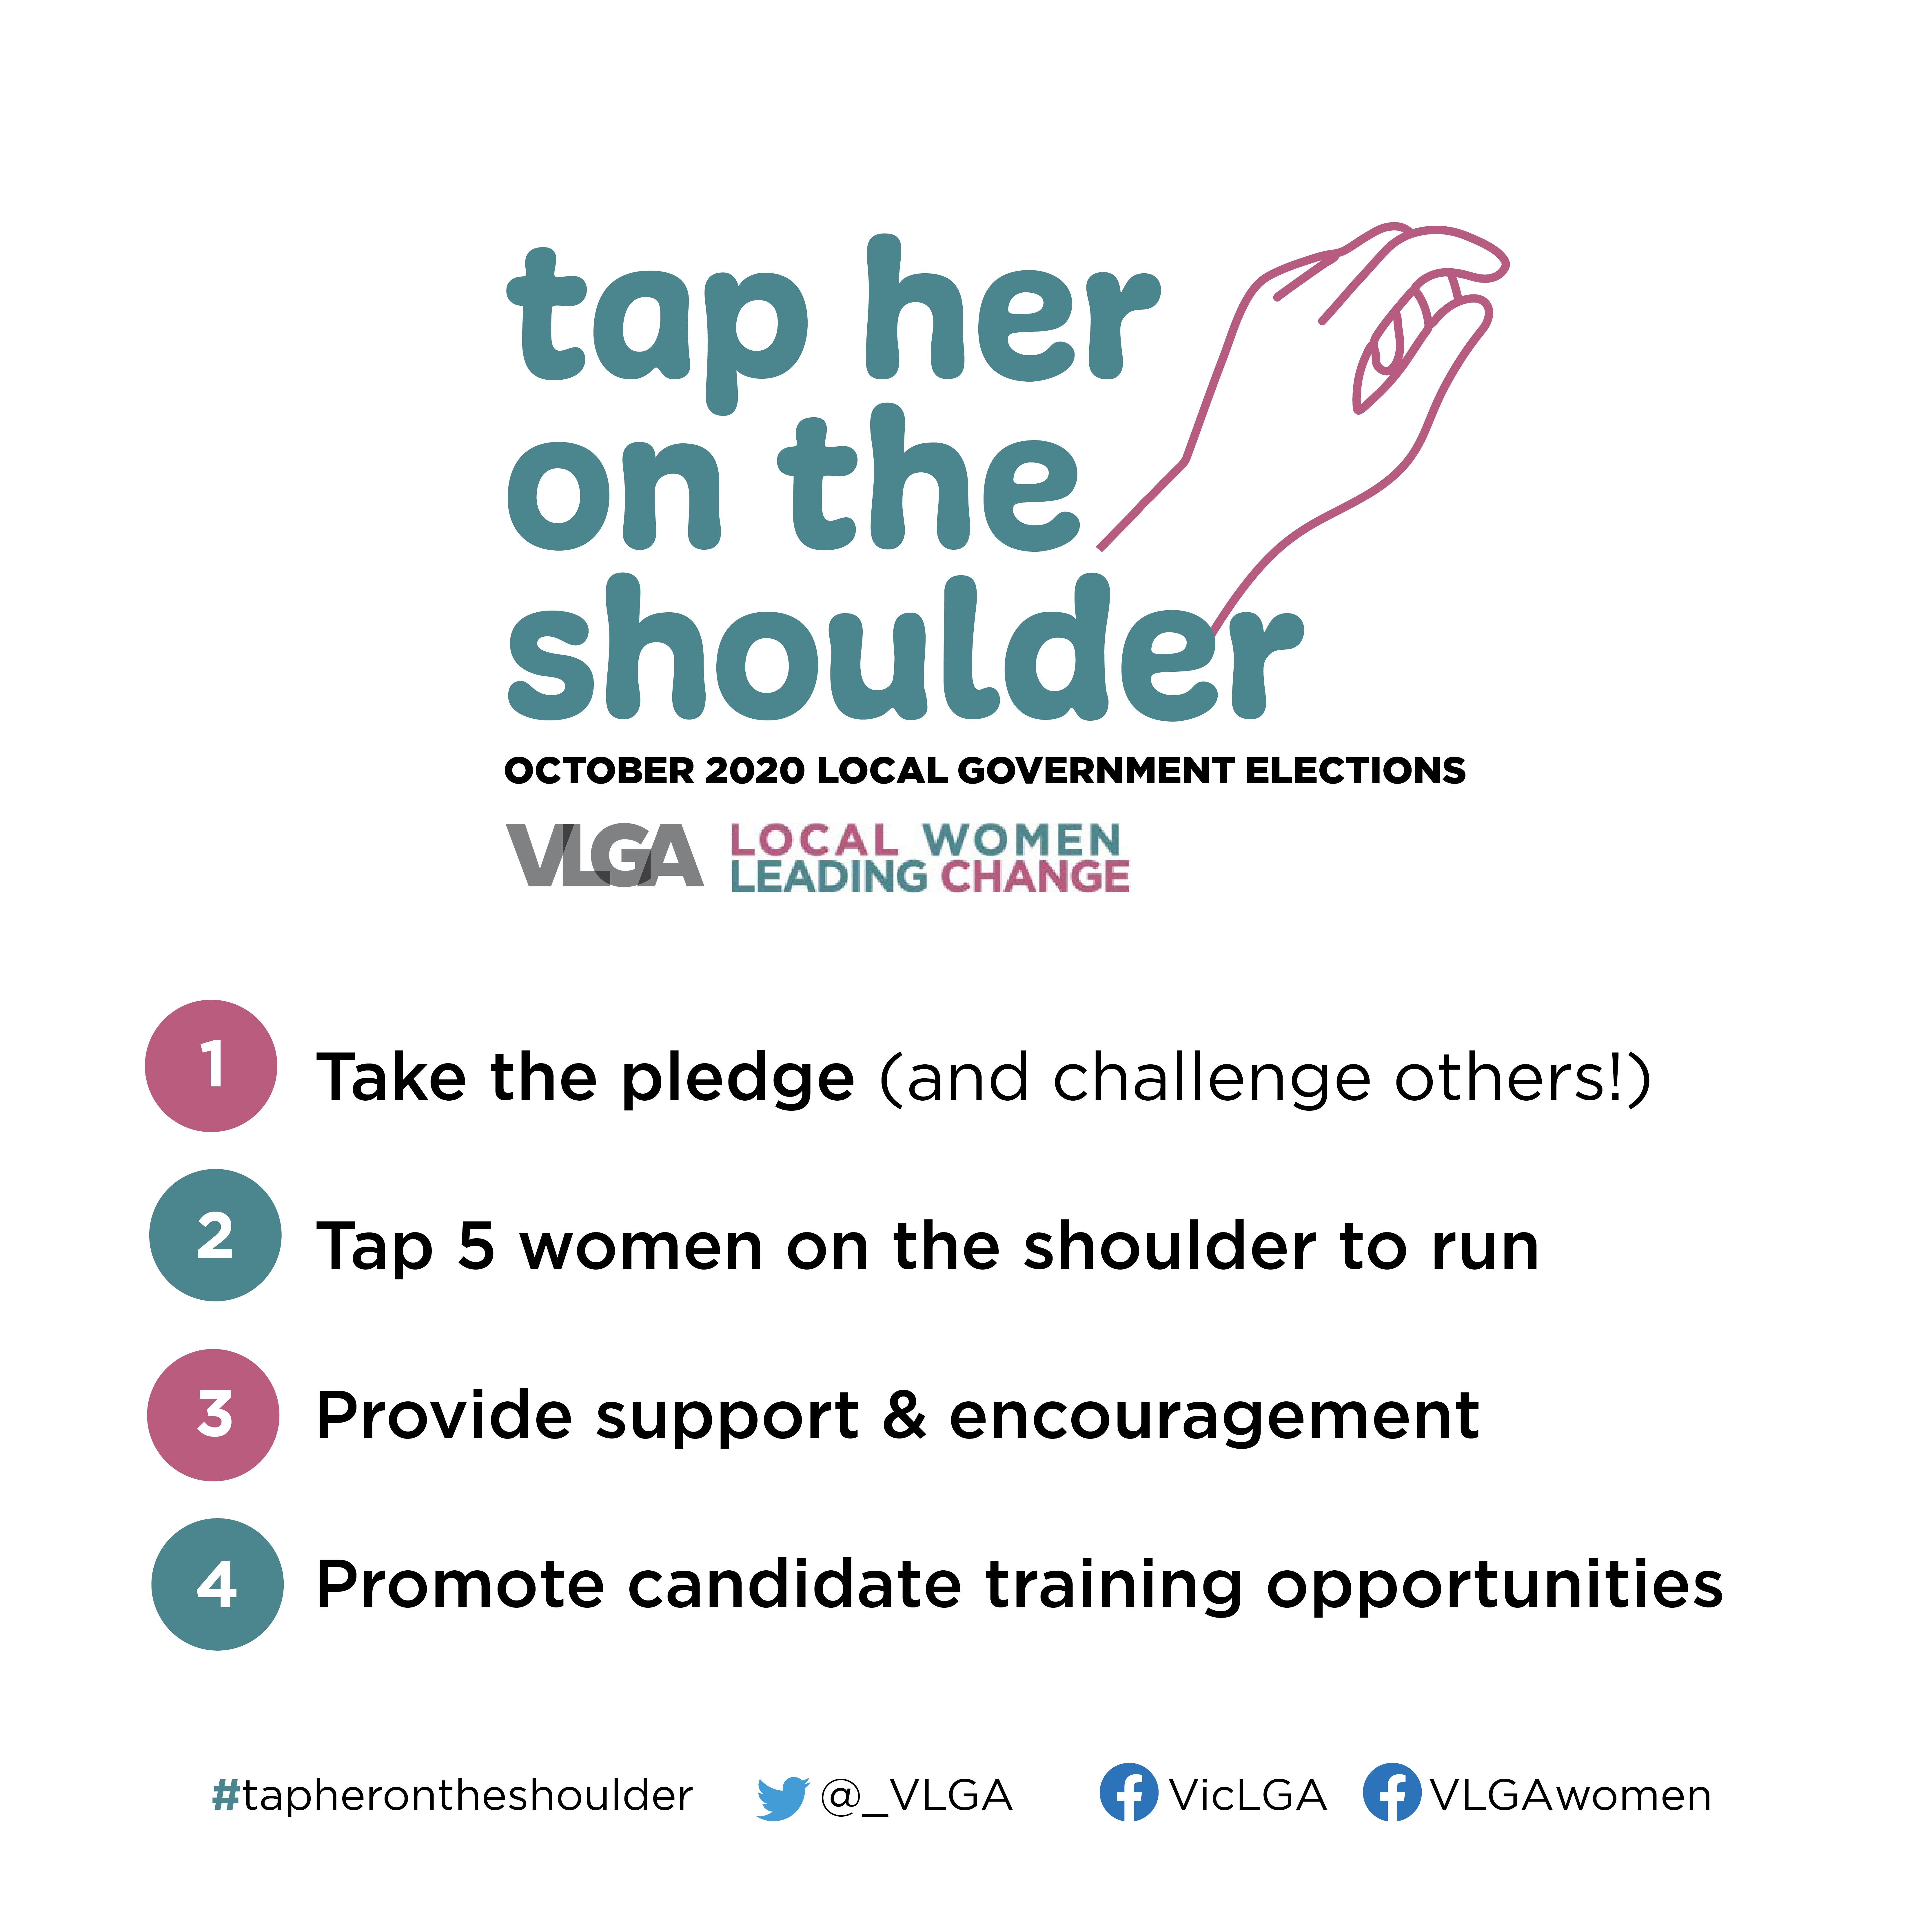 Instructions to 'Tap Her on the Shoulder'